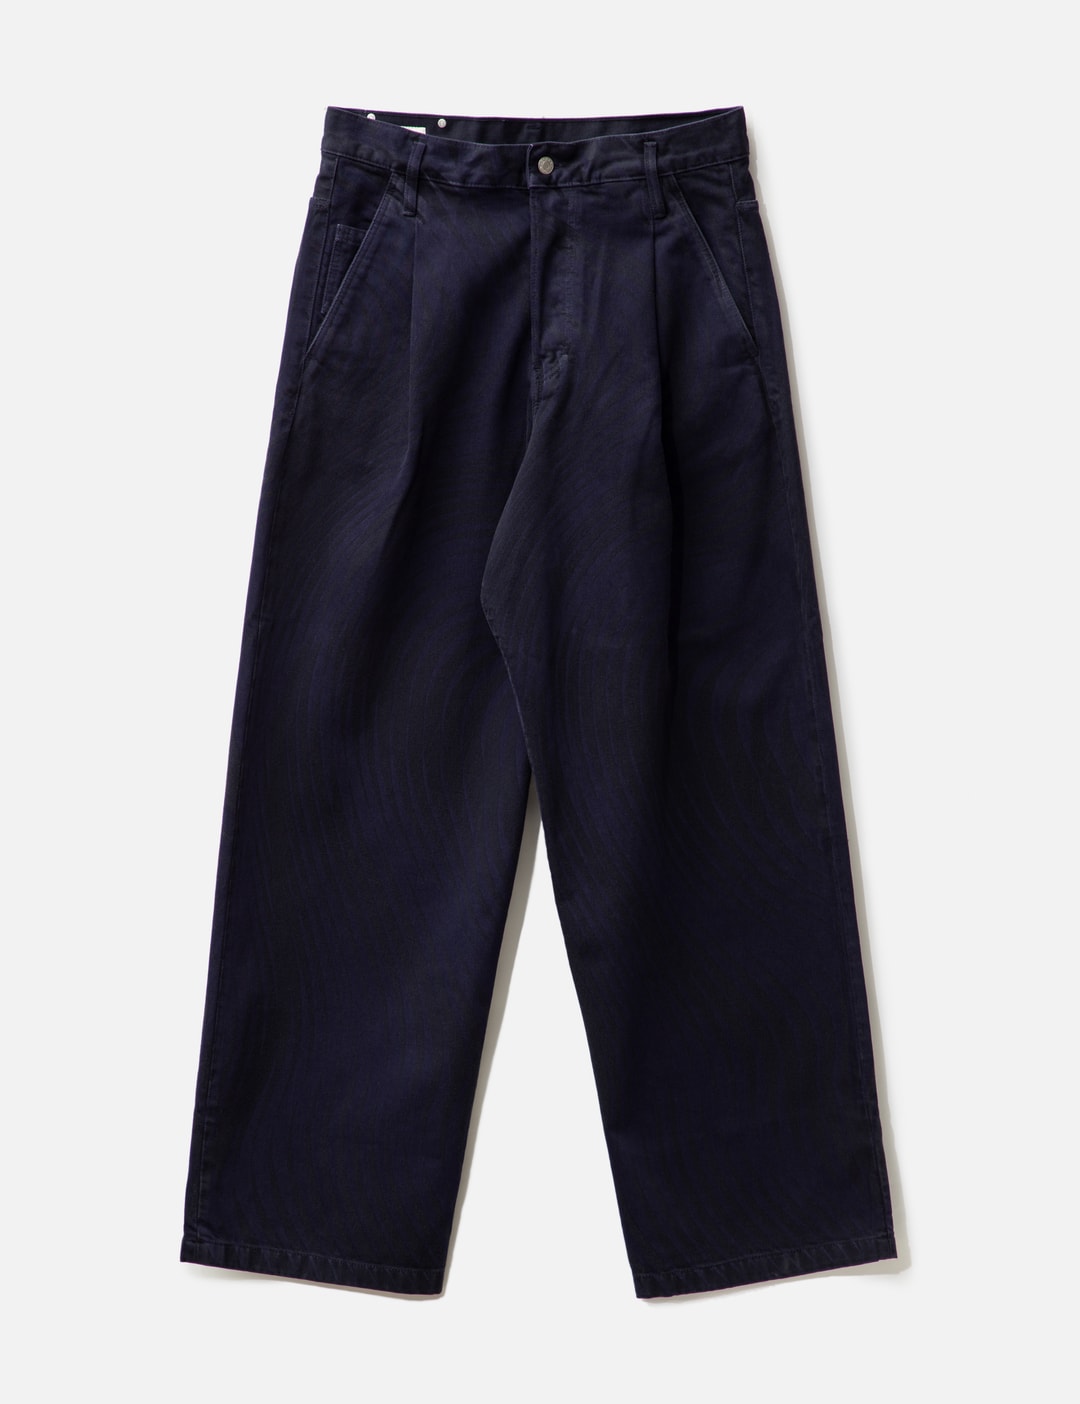 Dries Van Noten - Penning Pants | HBX - Globally Curated Fashion and ...